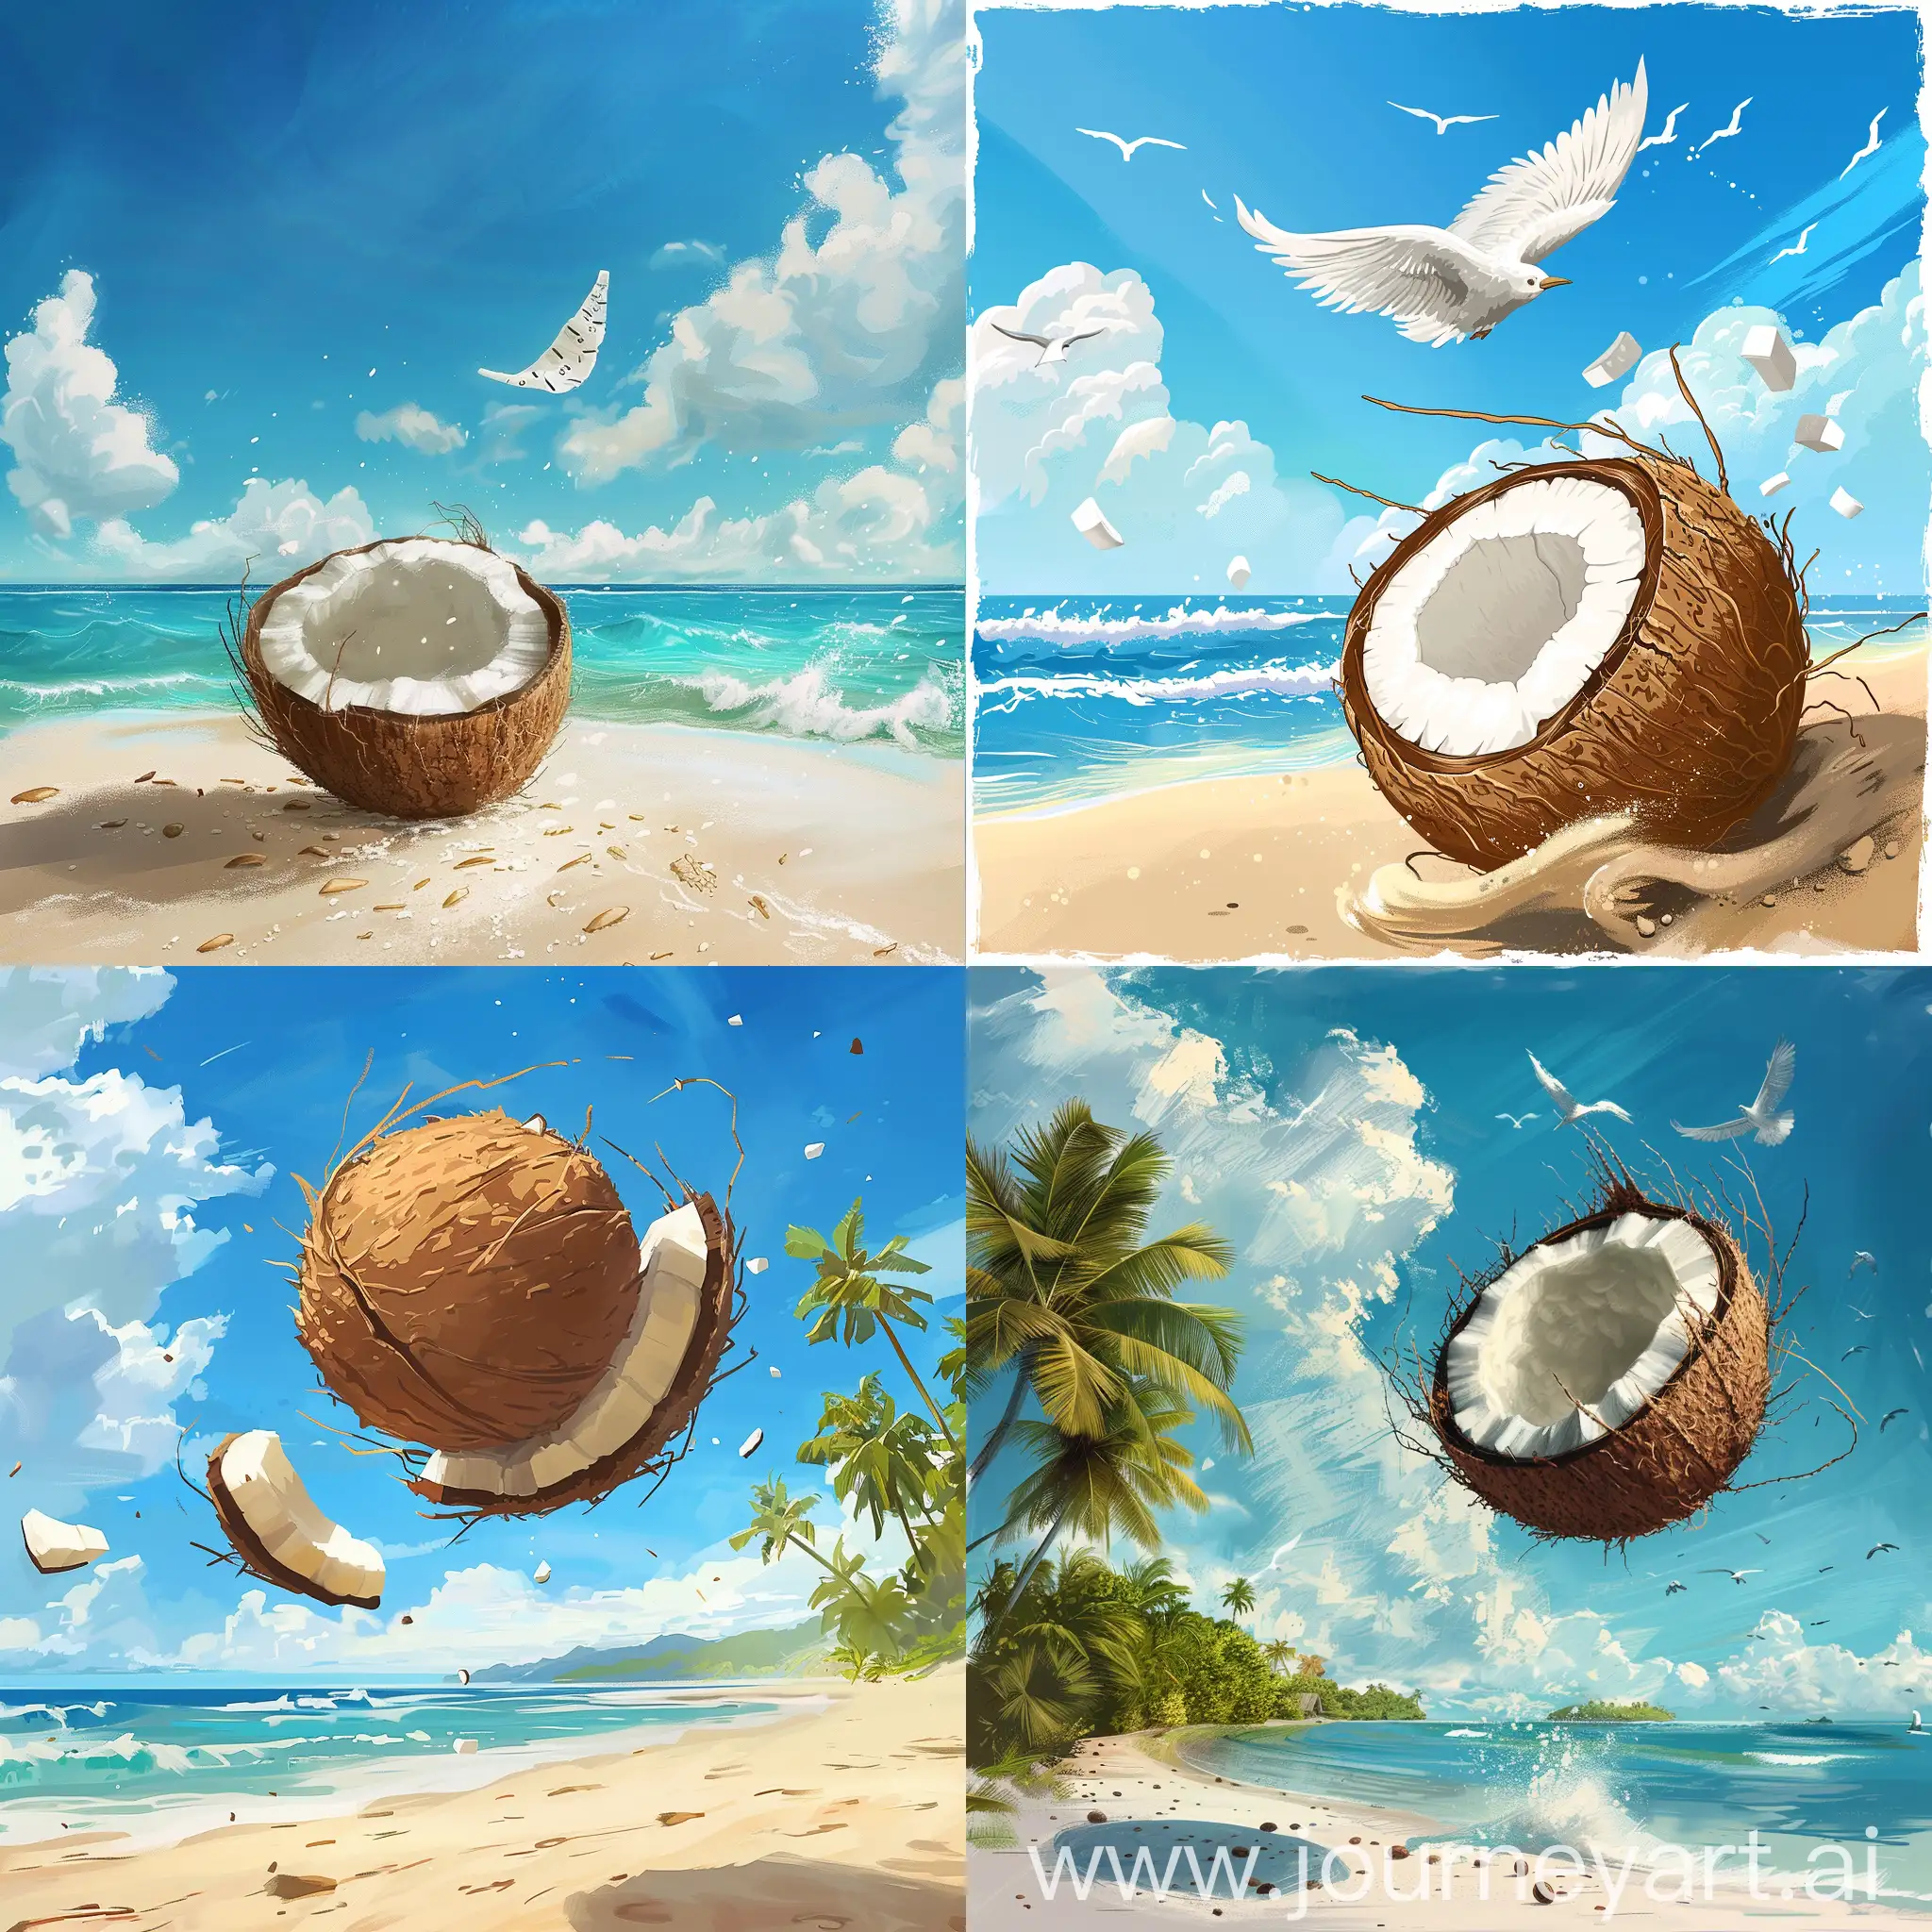 Flying-Coconut-with-Clicker-Counter-on-Beach-Background